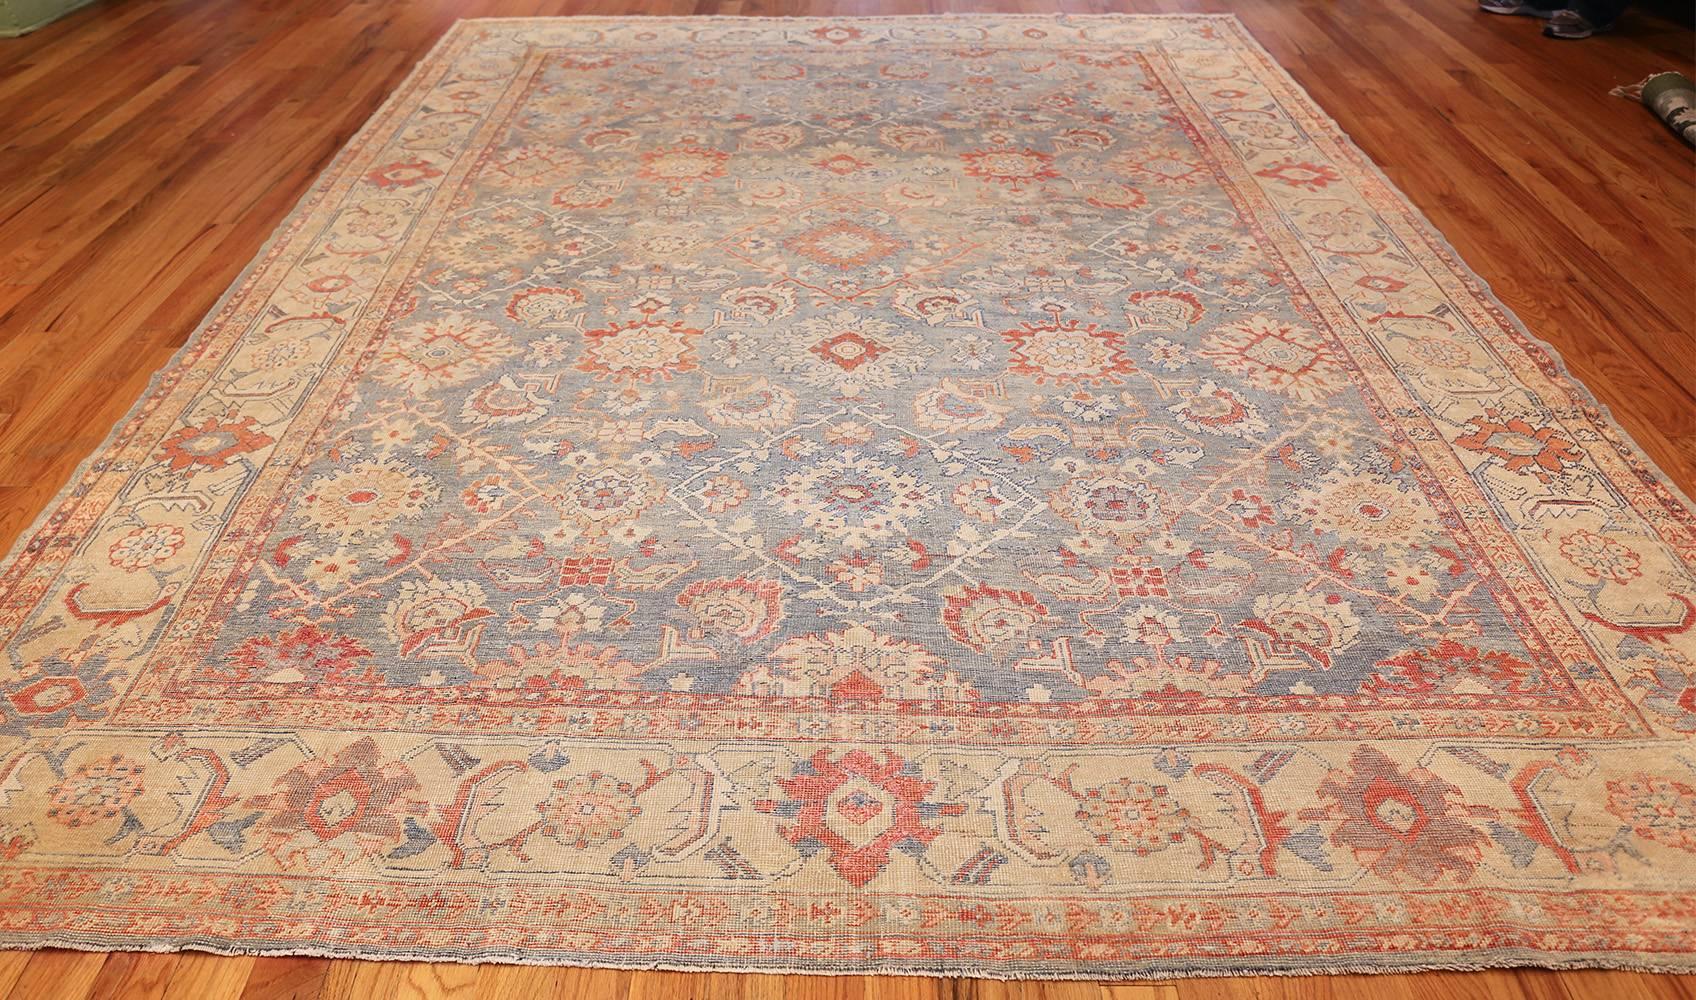 Magnificent Grayish Background Antique Sultanabad Persian Rug 49388, Country of Origin / Rug Type: Persian Rug, Circa Date: 1900’s – This  breathtaking antique Persian Sultanabad rug features the angular, less curve linear, patterns representative